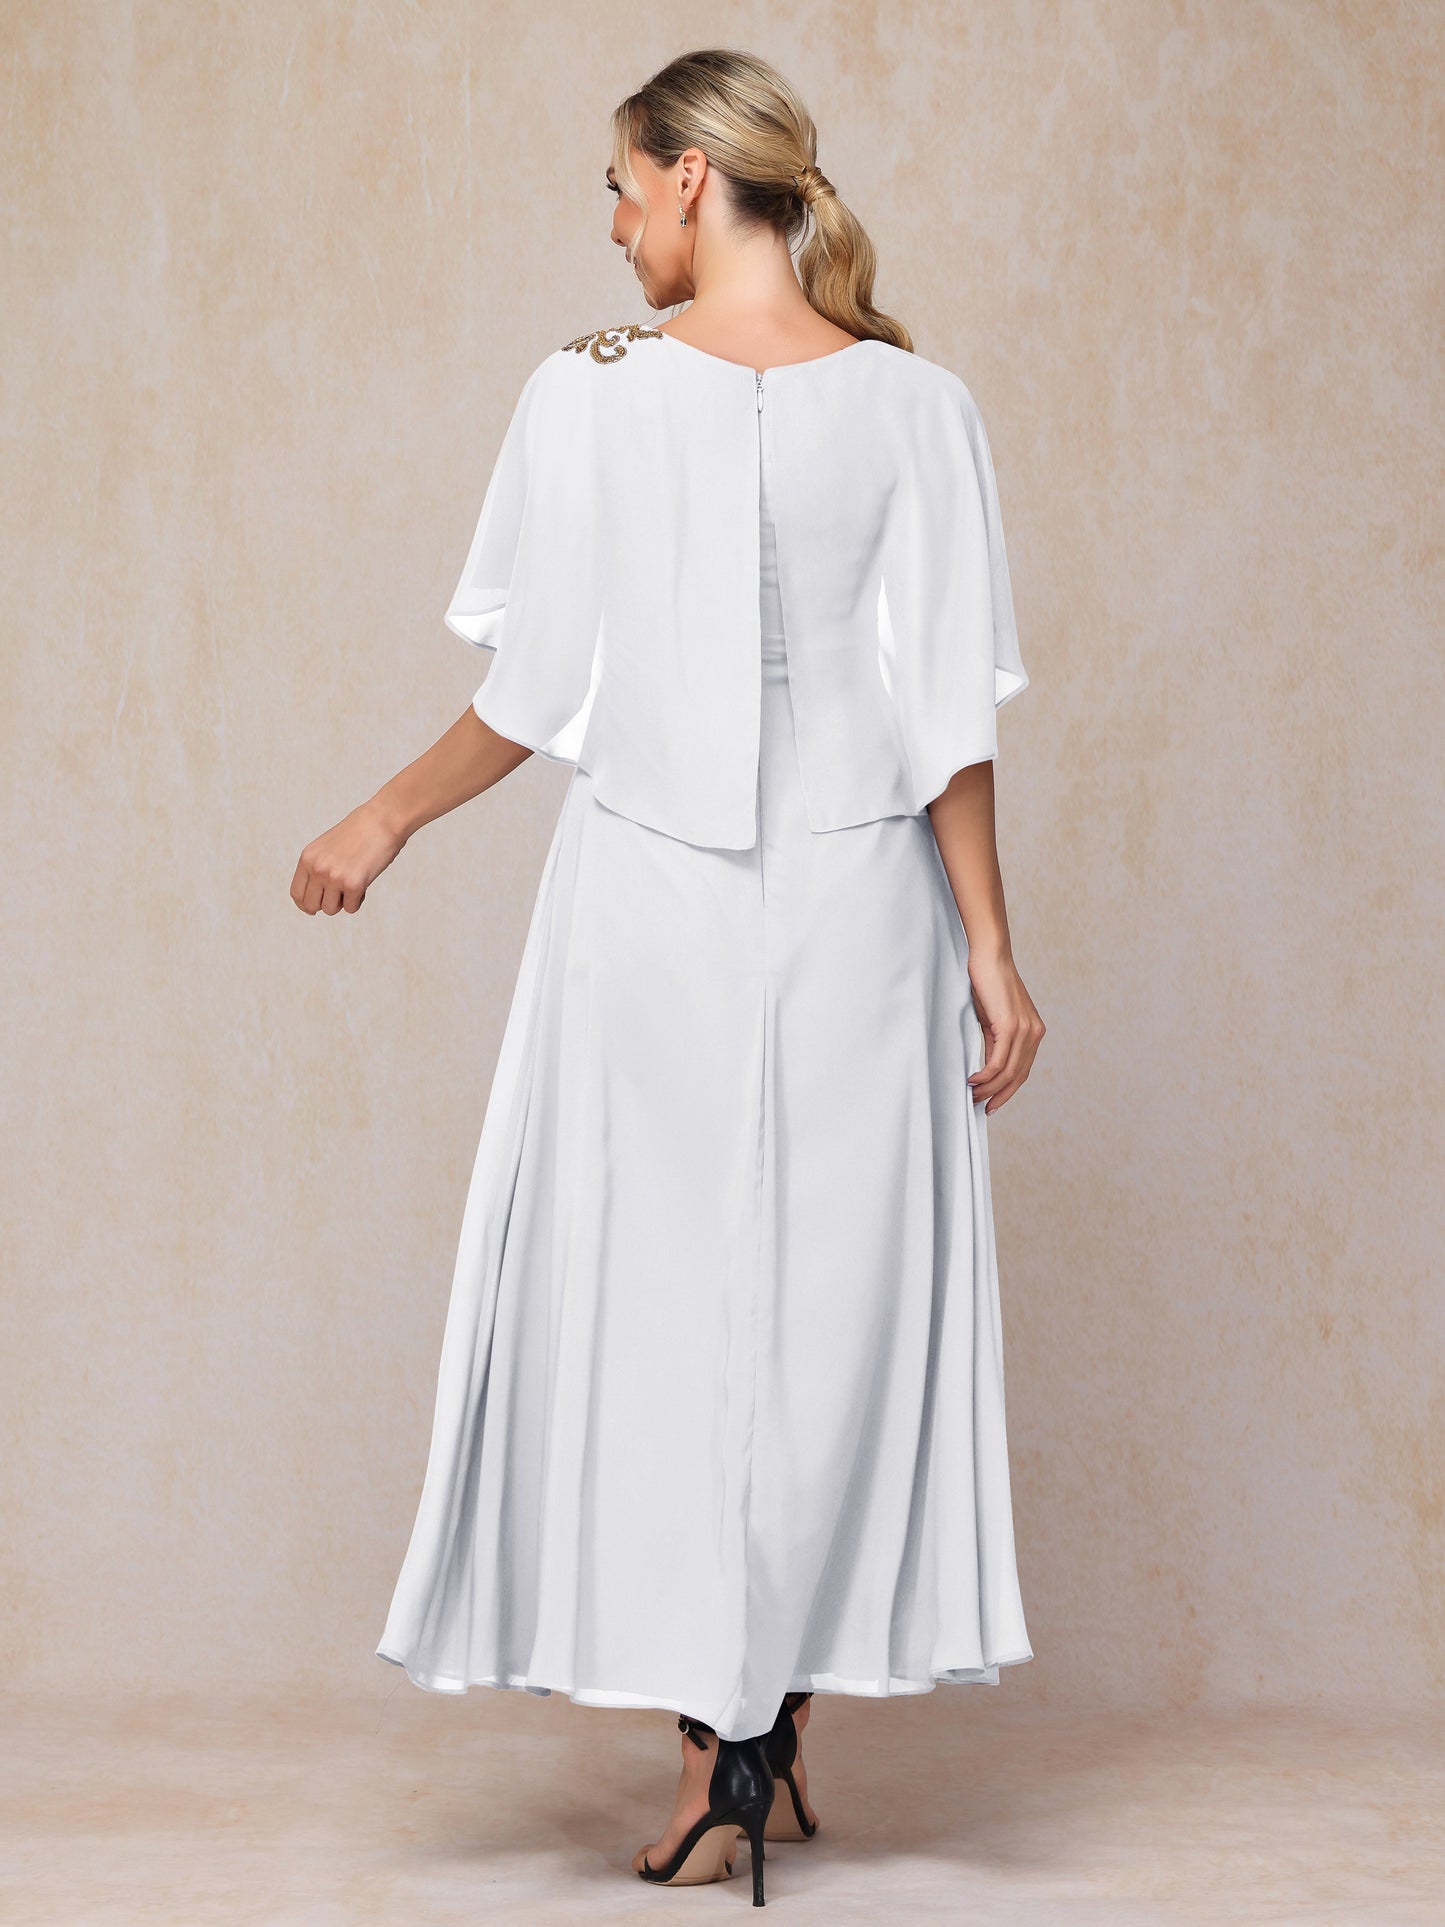 Formal Short Sleeves Ankle Length Chiffon Wedding Guest Dresses